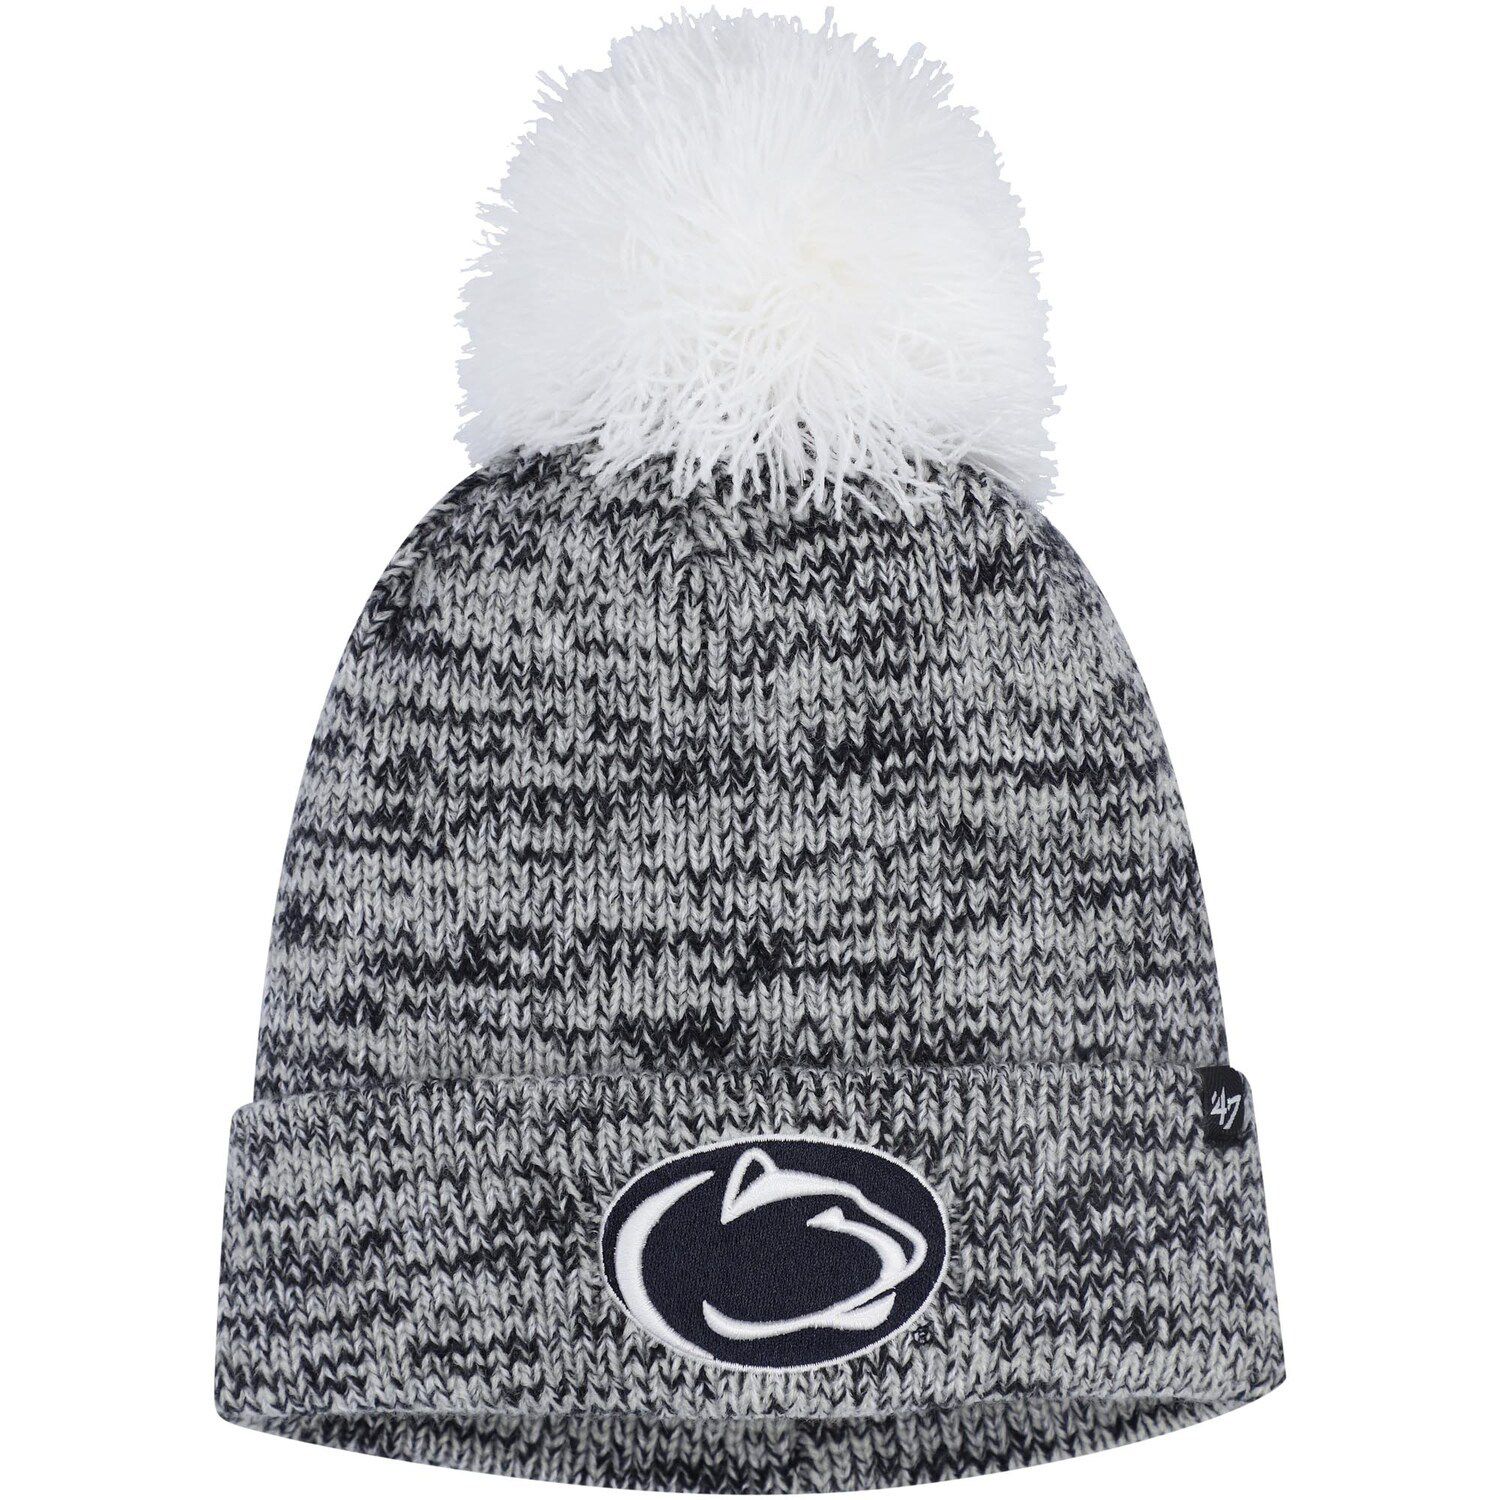 Image for Unbranded Women's '47 Navy Penn State Nittany Lions Triple Cross Cuffed Knit Hat with Pom at Kohl's.